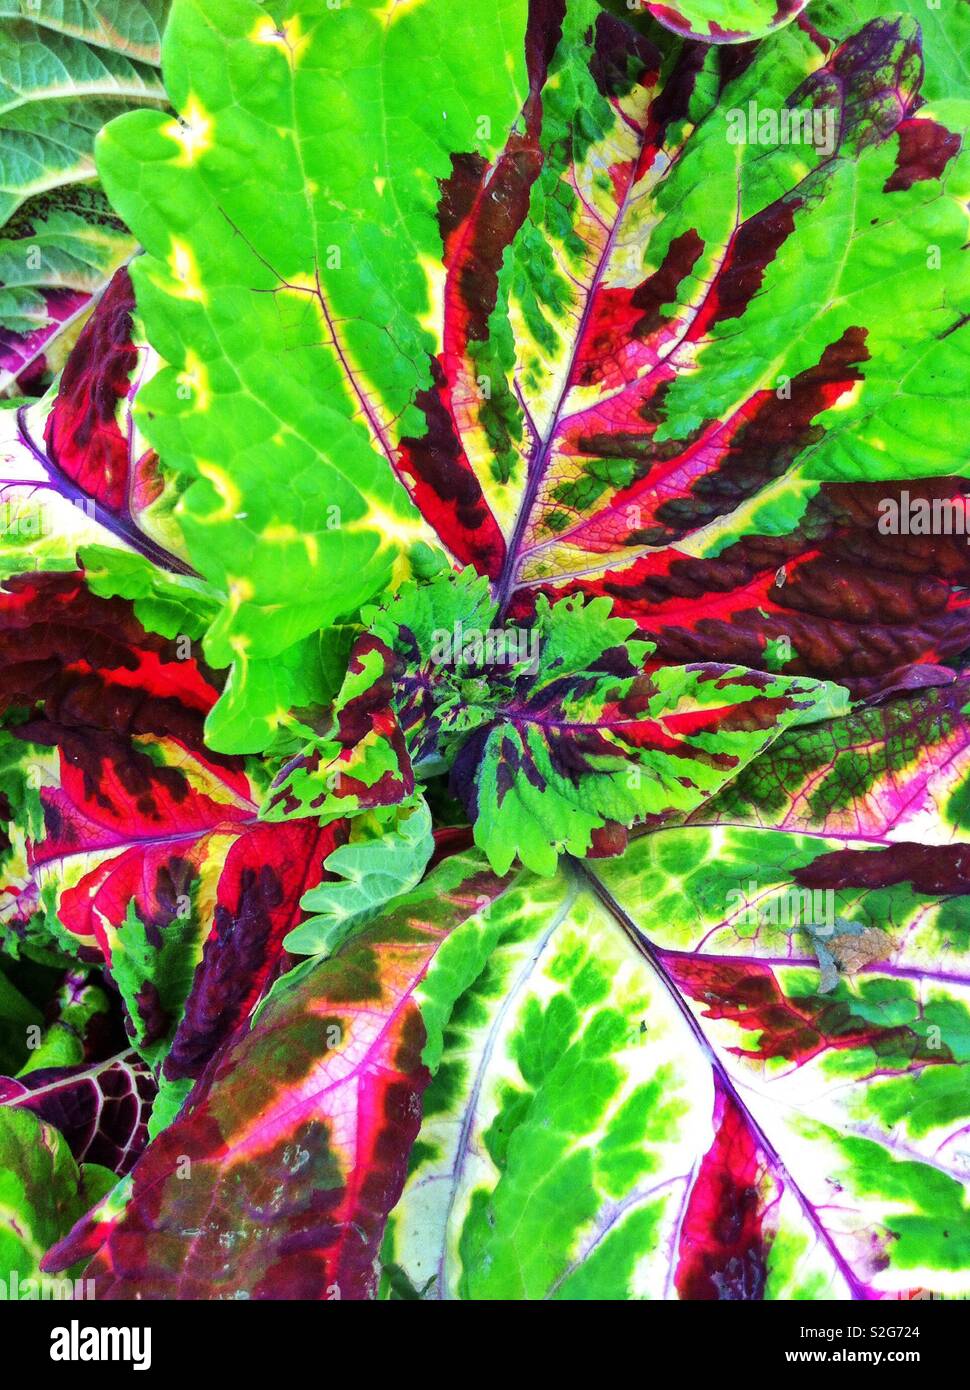 Green red coleus leaves Stock Photo